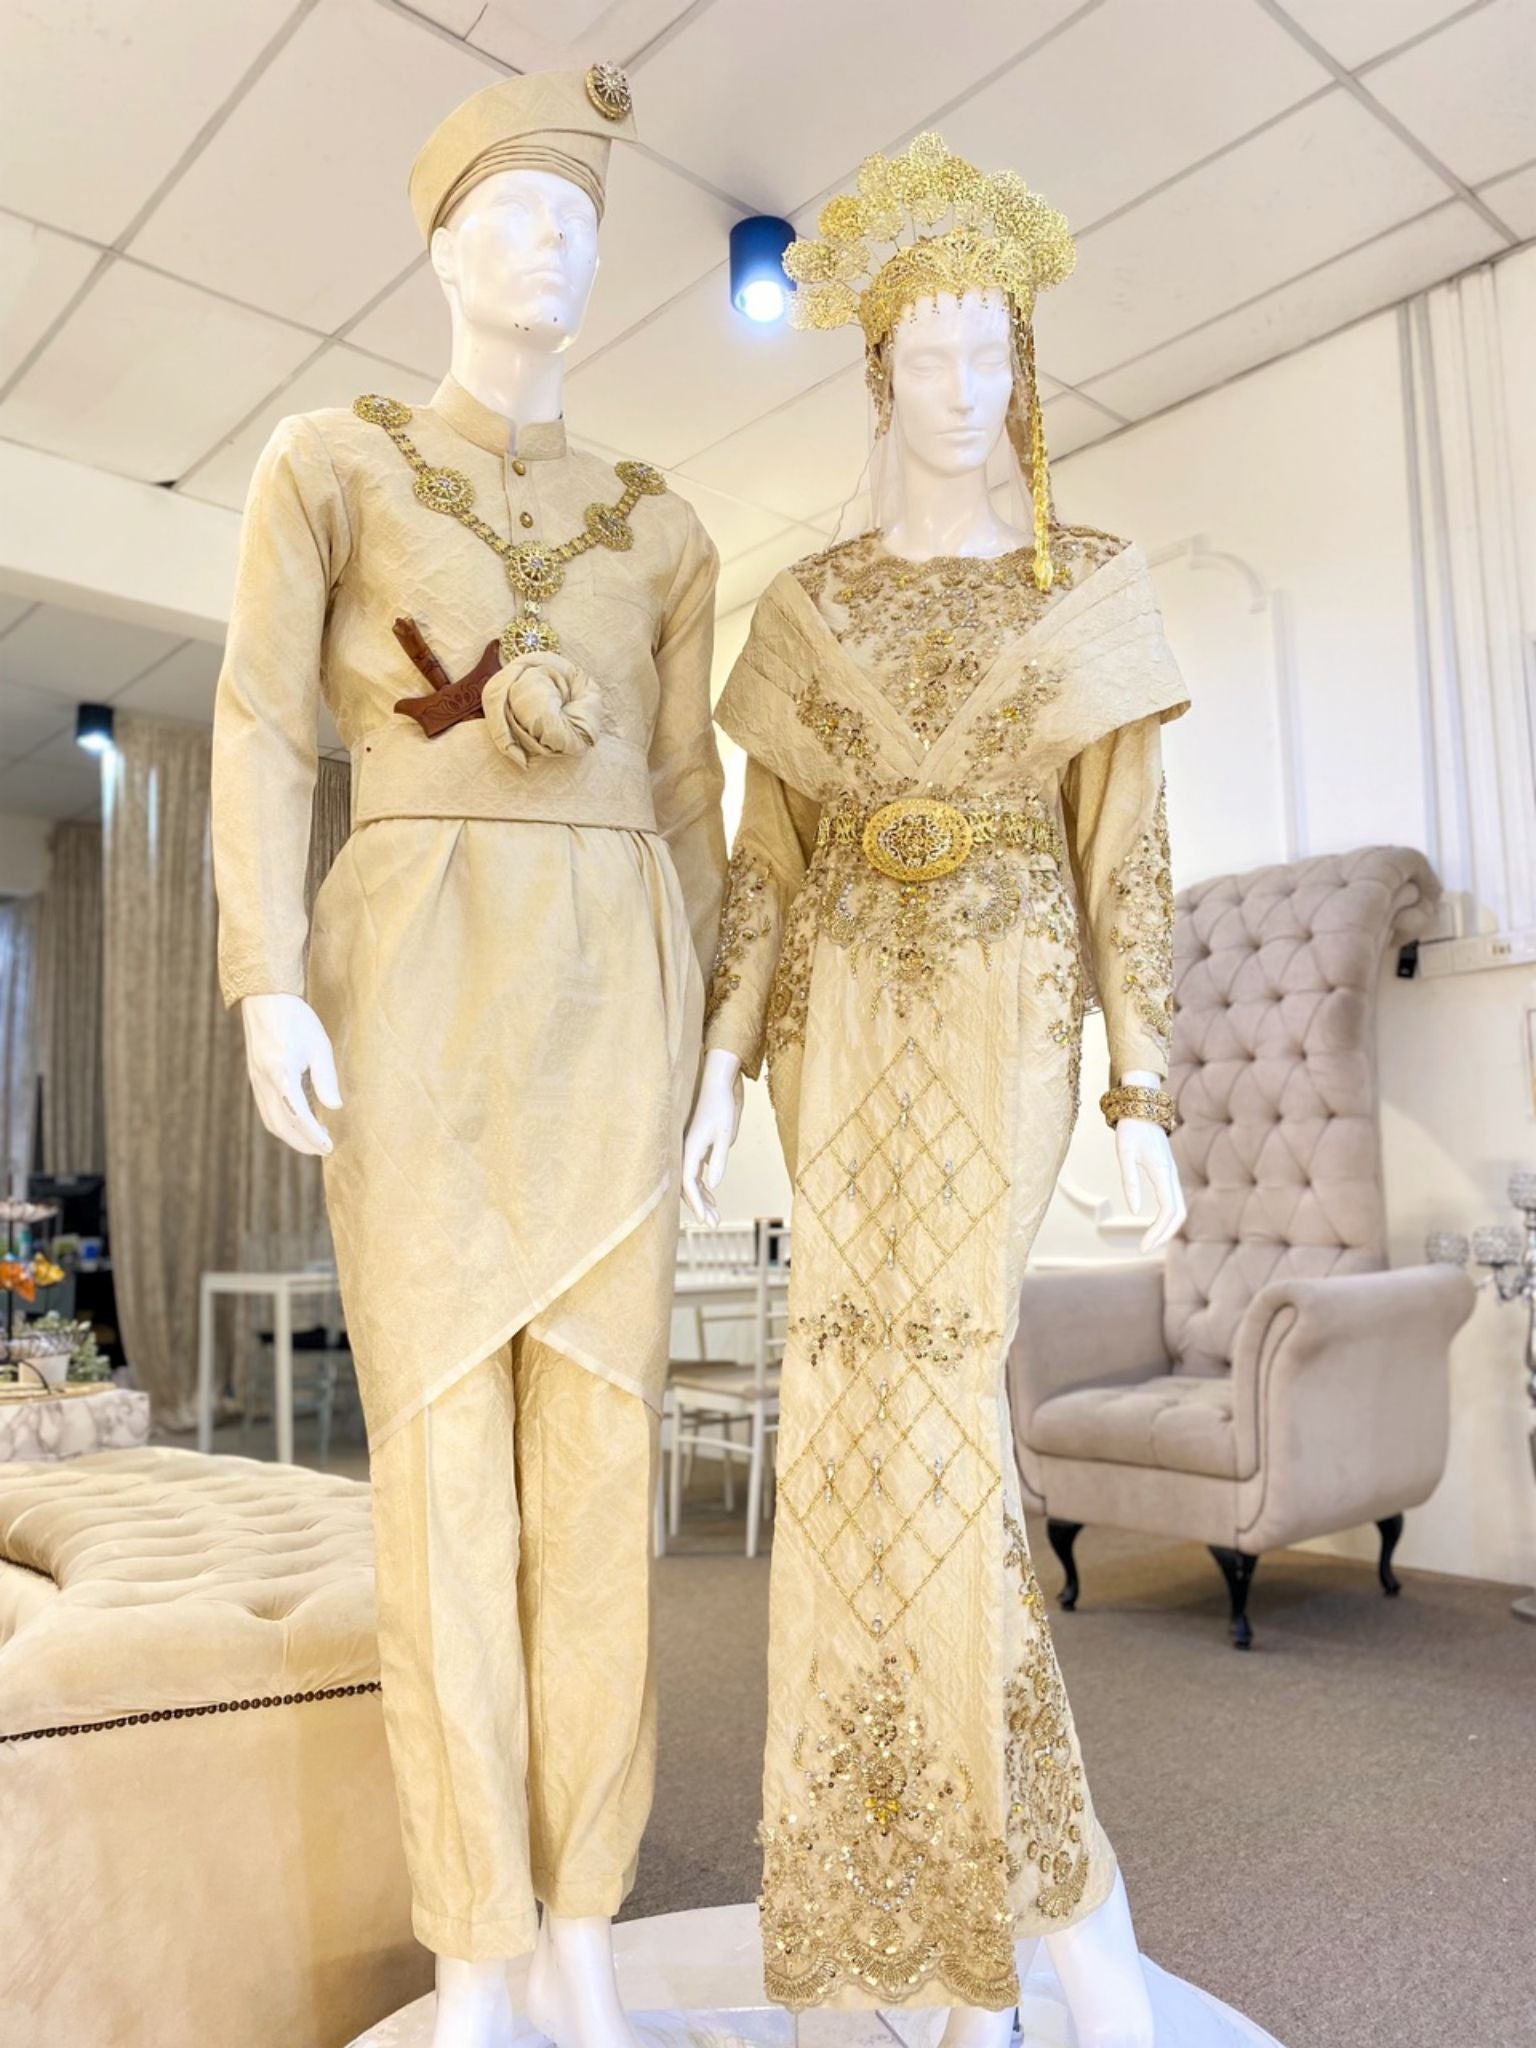 This image shows a man and a woman mannequin wearing traditional Malay wedding attire. The man is wearing a kot raihan, while the woman is wearing a dress. The mannequins are standing next to each other, and they are both smiling. The image is perfect for a wedding website or a clothing store that rent baju sanding.